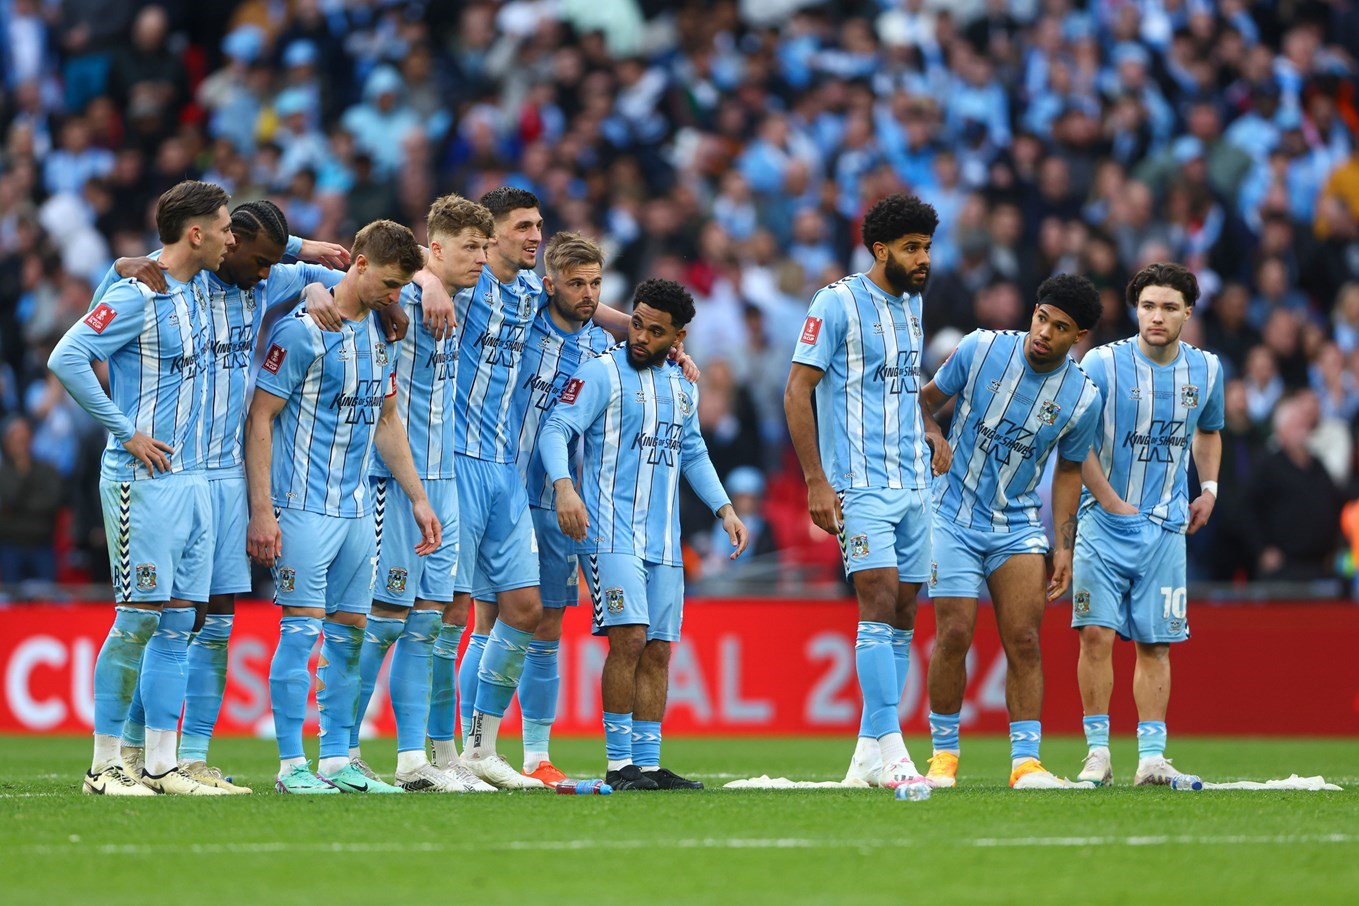 Coventry City players defeat with dignity